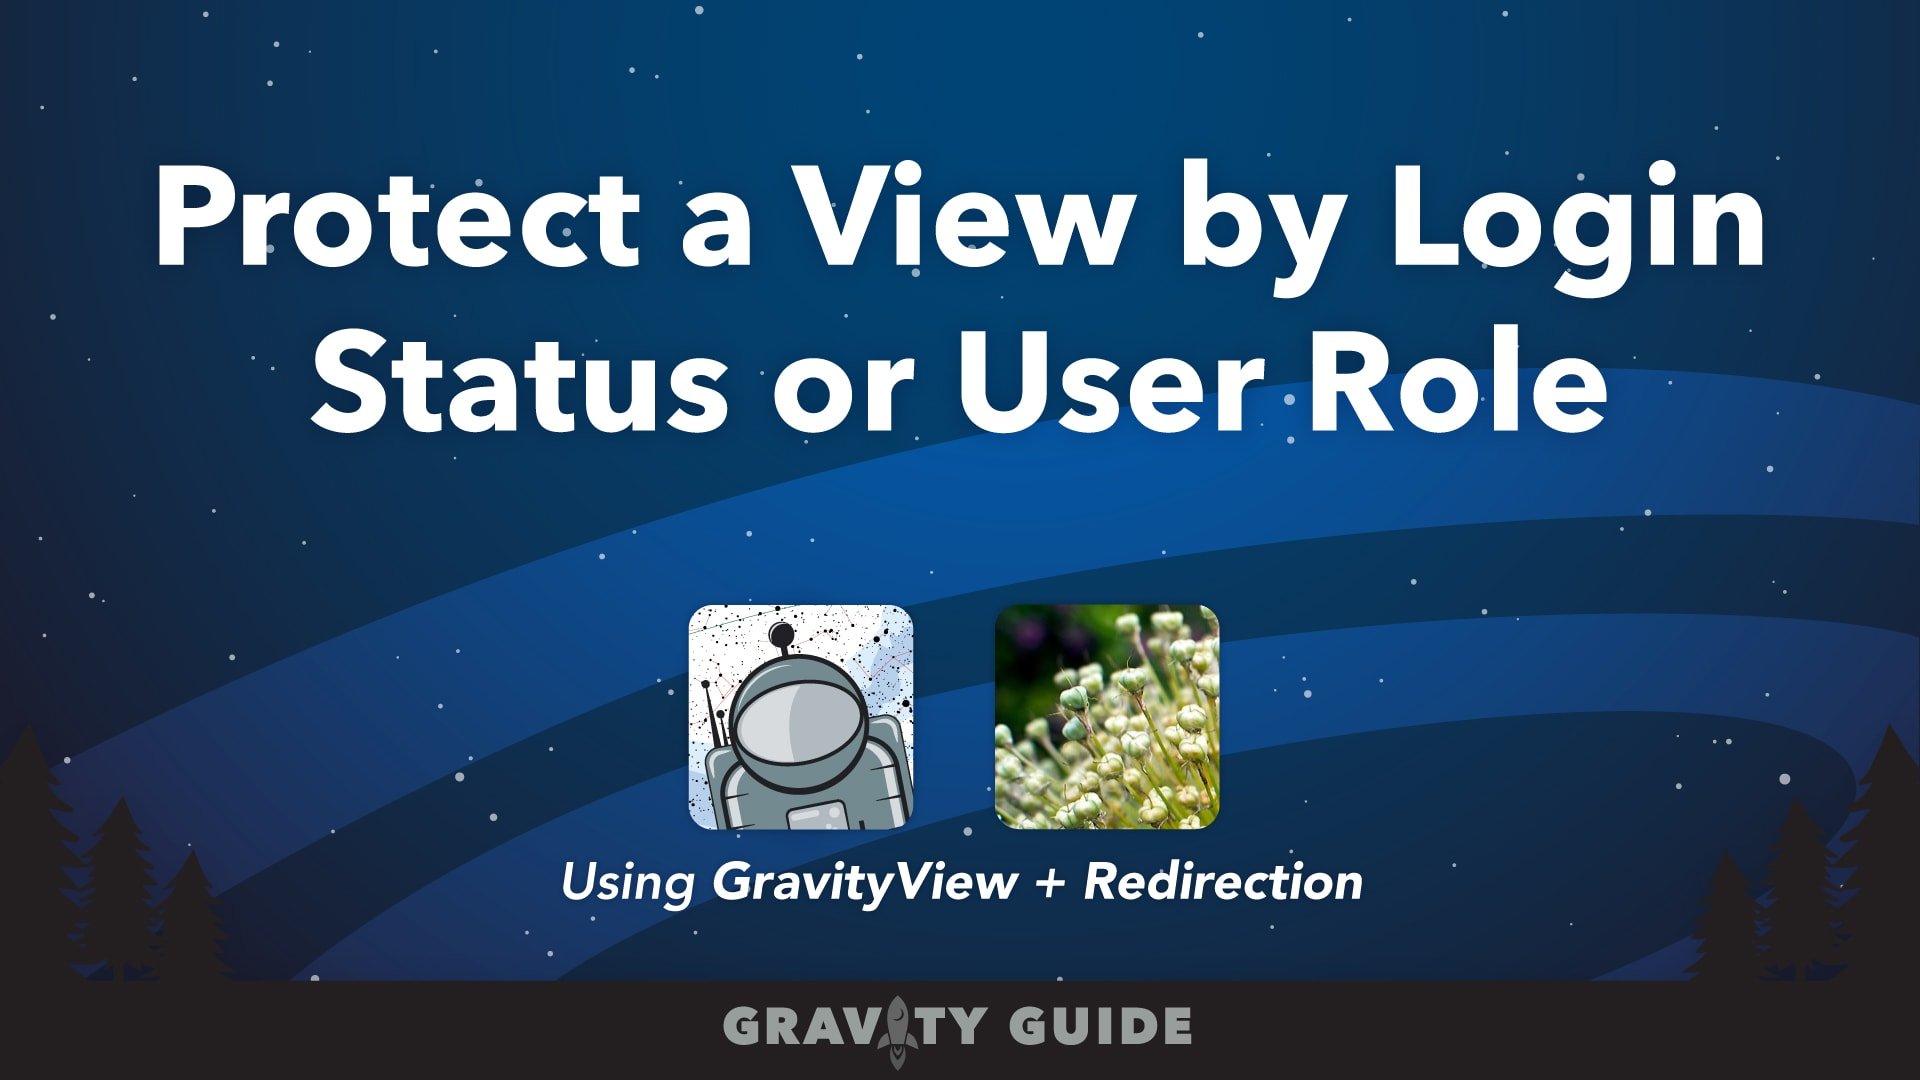 Protect a View by Login Status or User Role